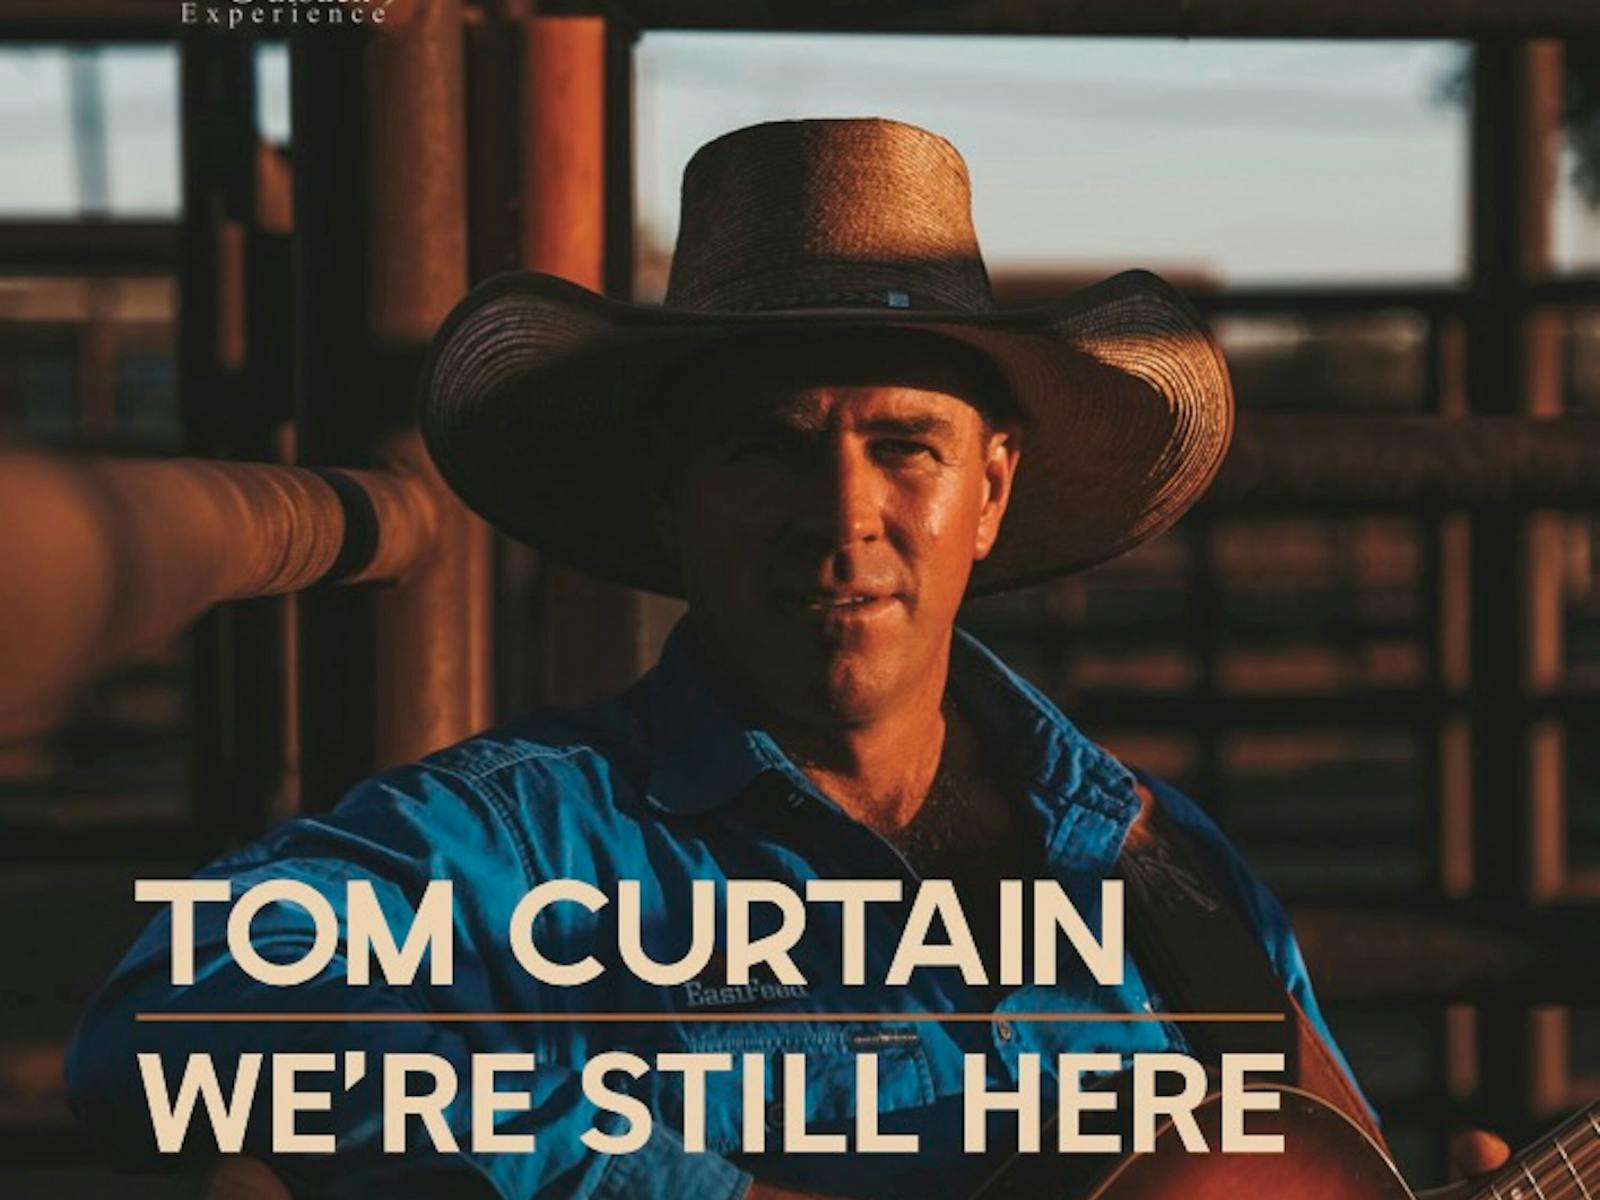 Image for Tom Curtain’s 'We’re Still Here' Tour – Forbes